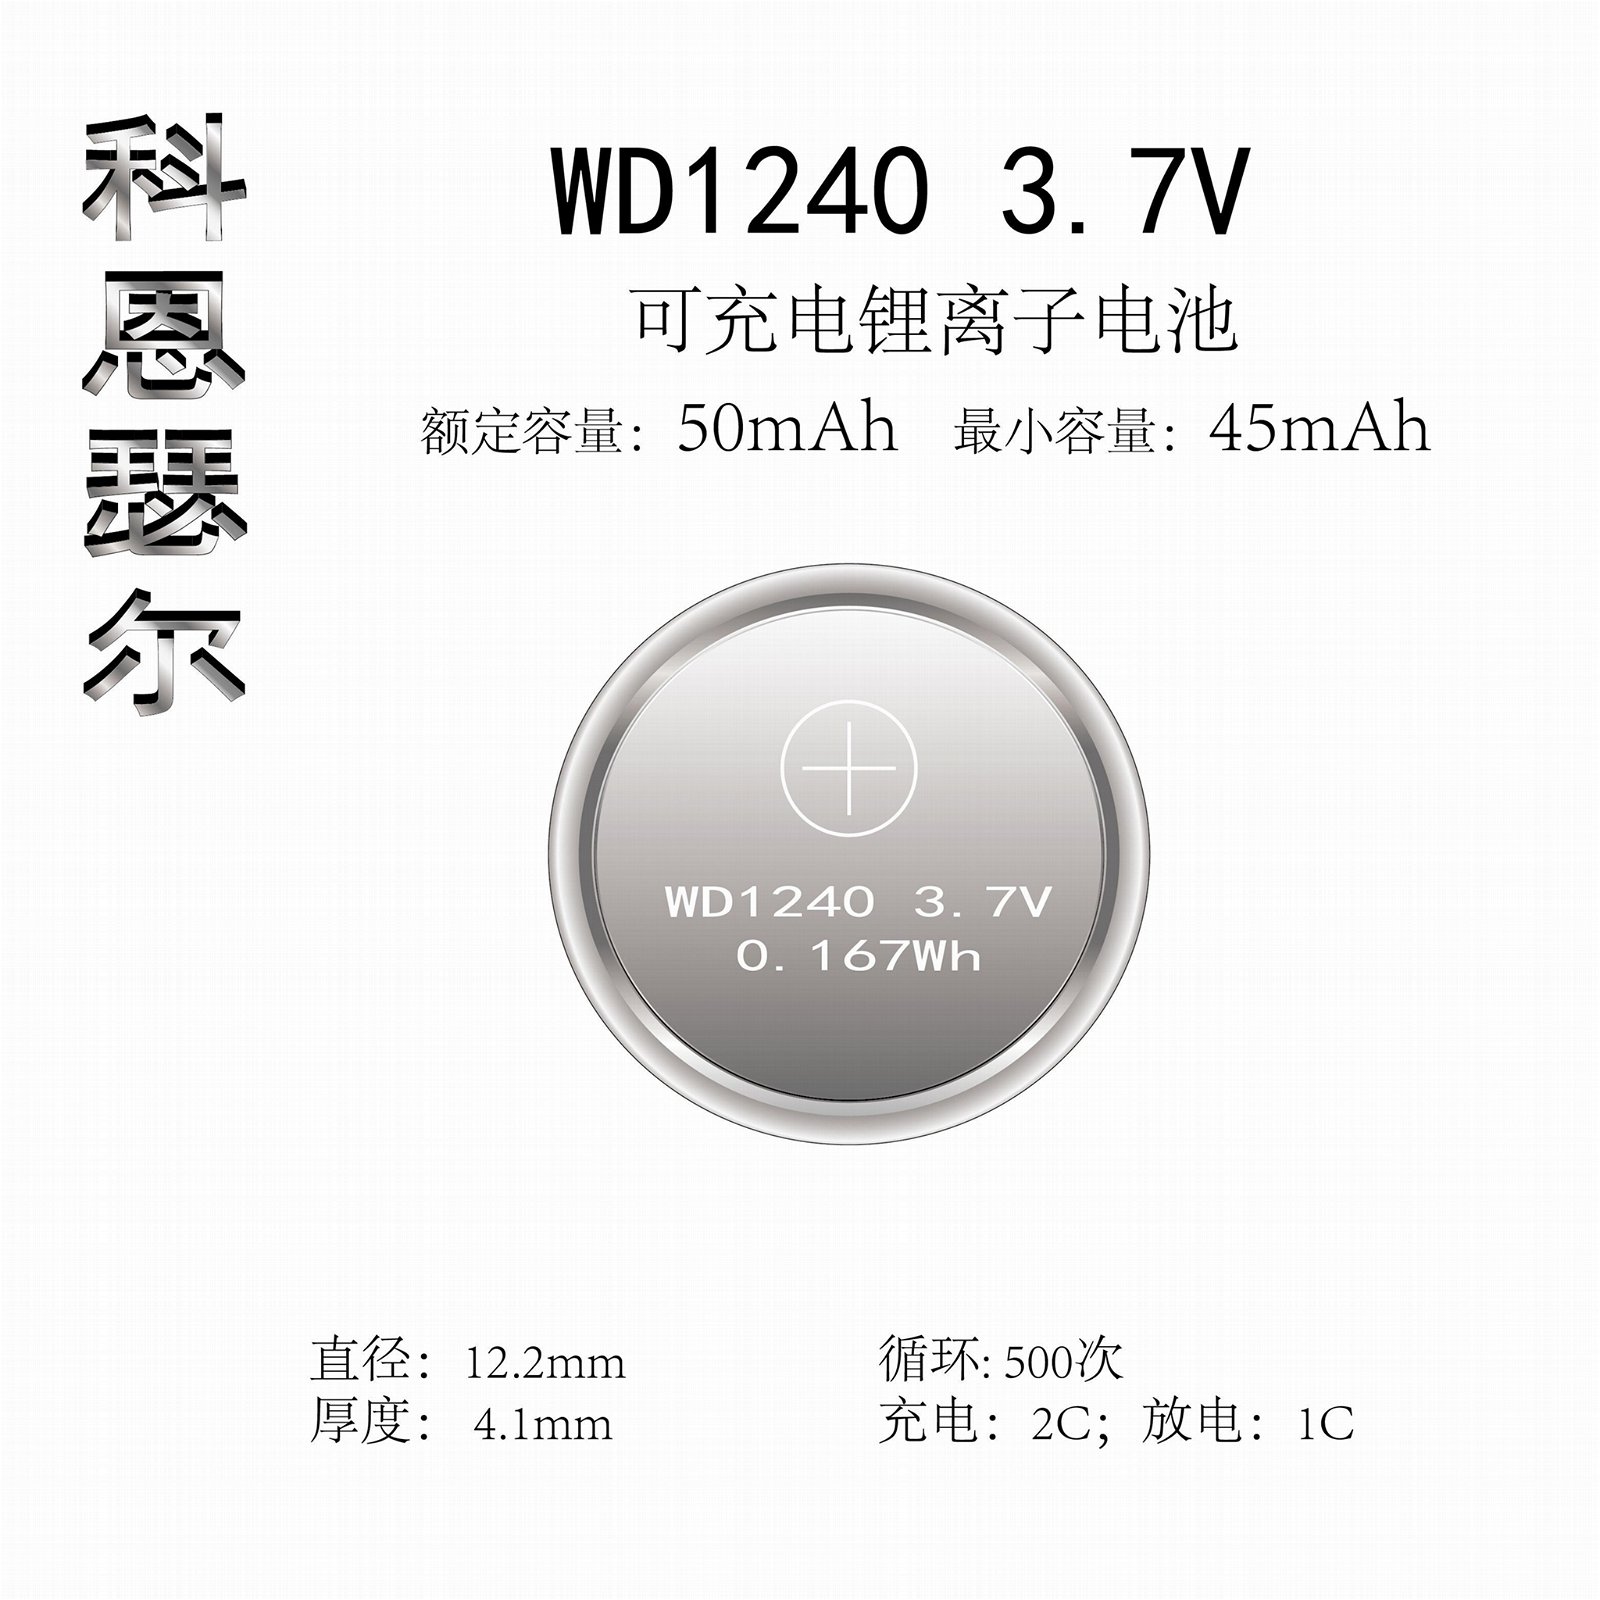 TWS wireless headset hearing aid button high capacity lithium ion battery